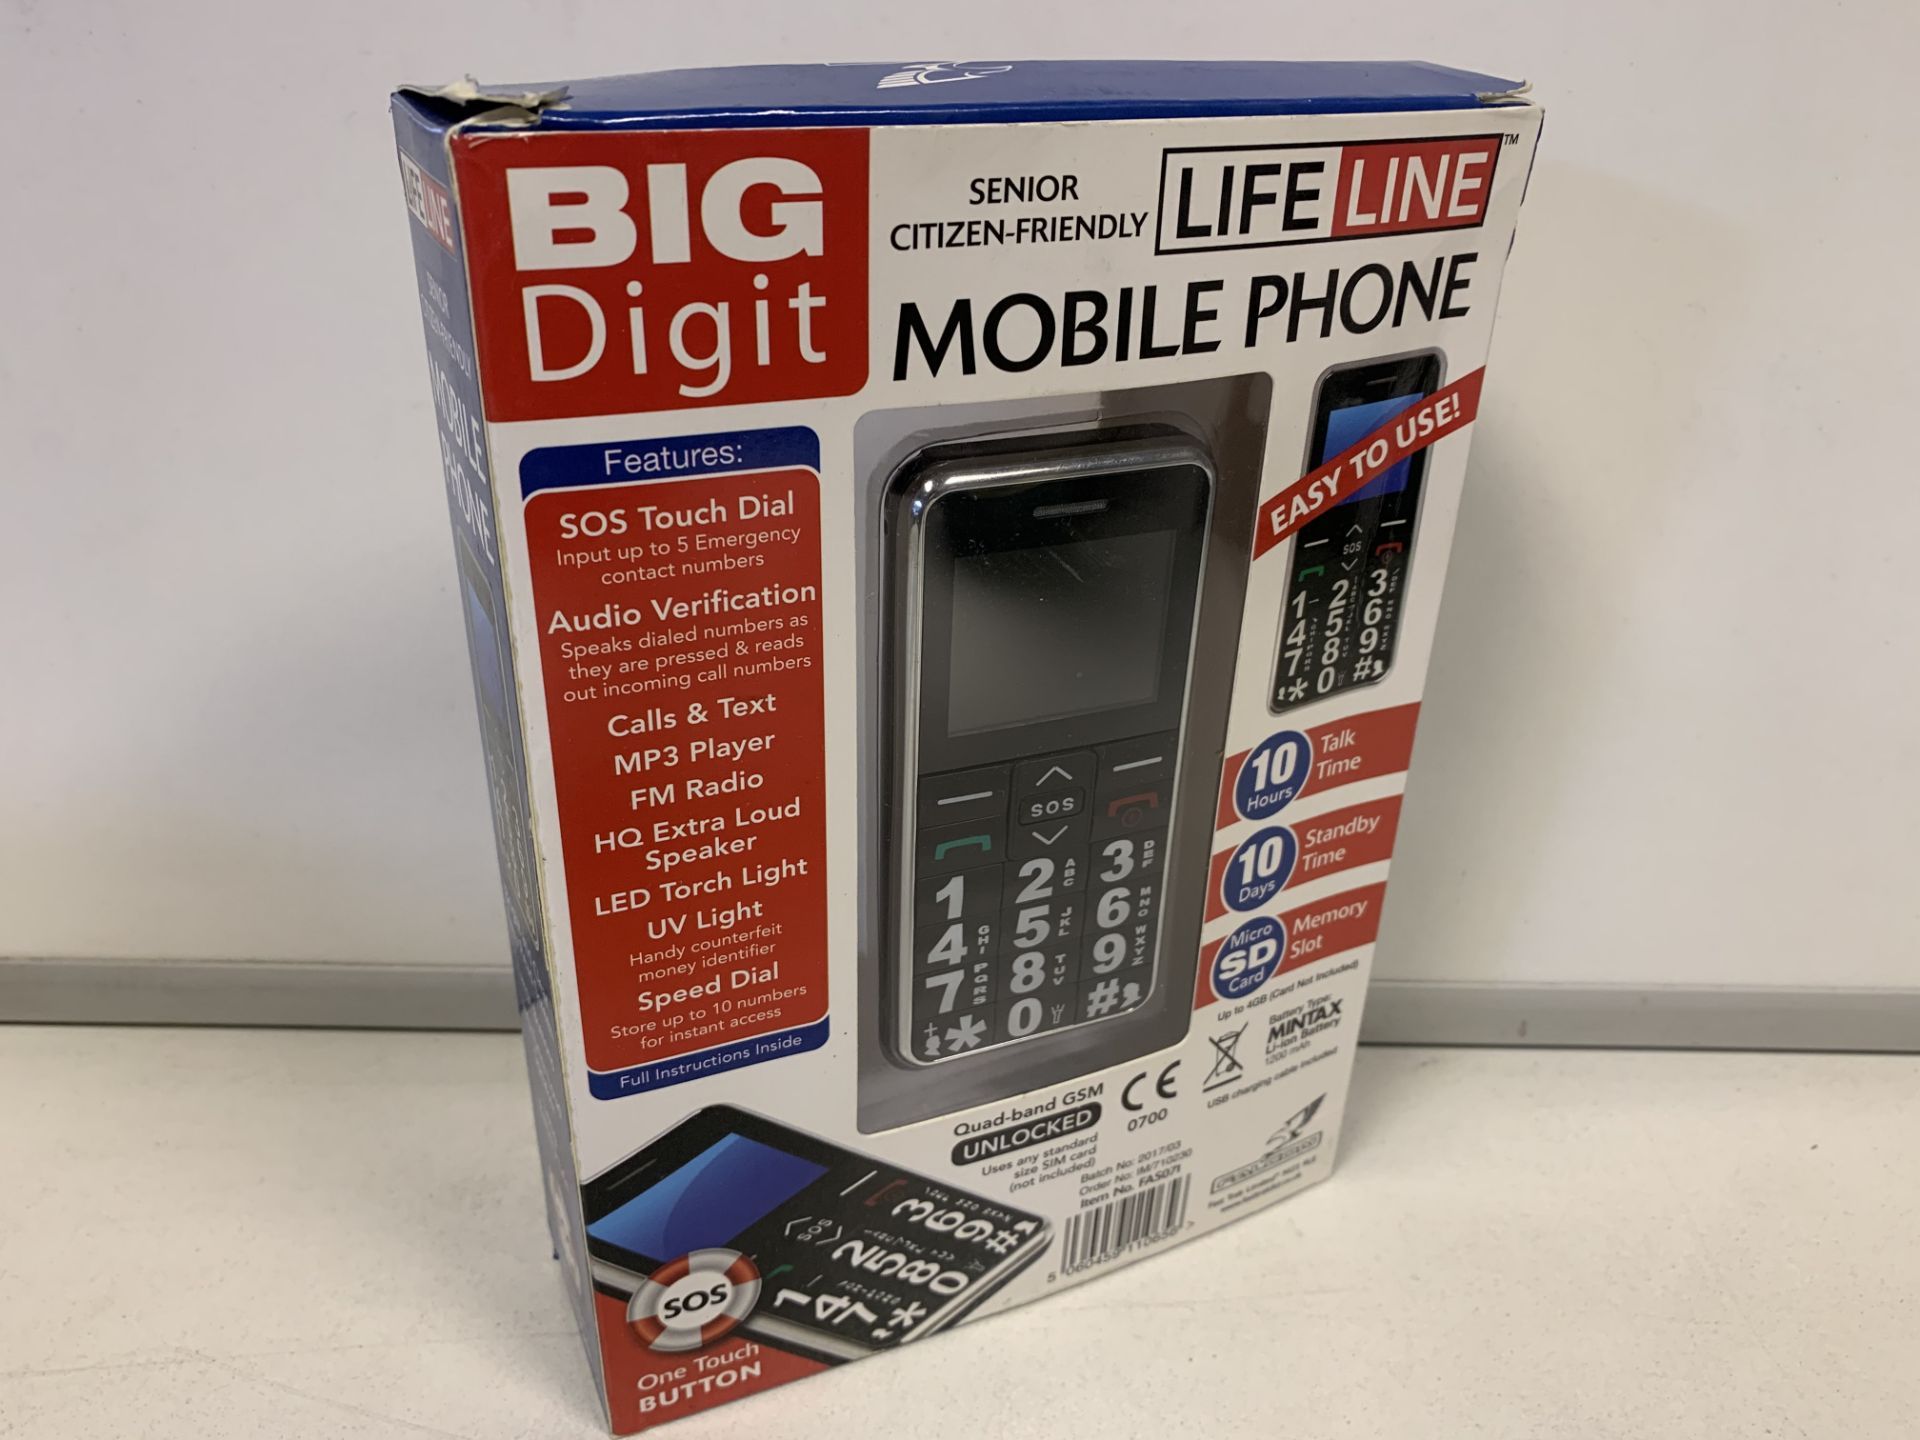 3 x NEW LIFELINE BIG DIGIT MOBILE PHONES - 10 HOURS TALK TIME, 10 HOURS STANDBY TIME.